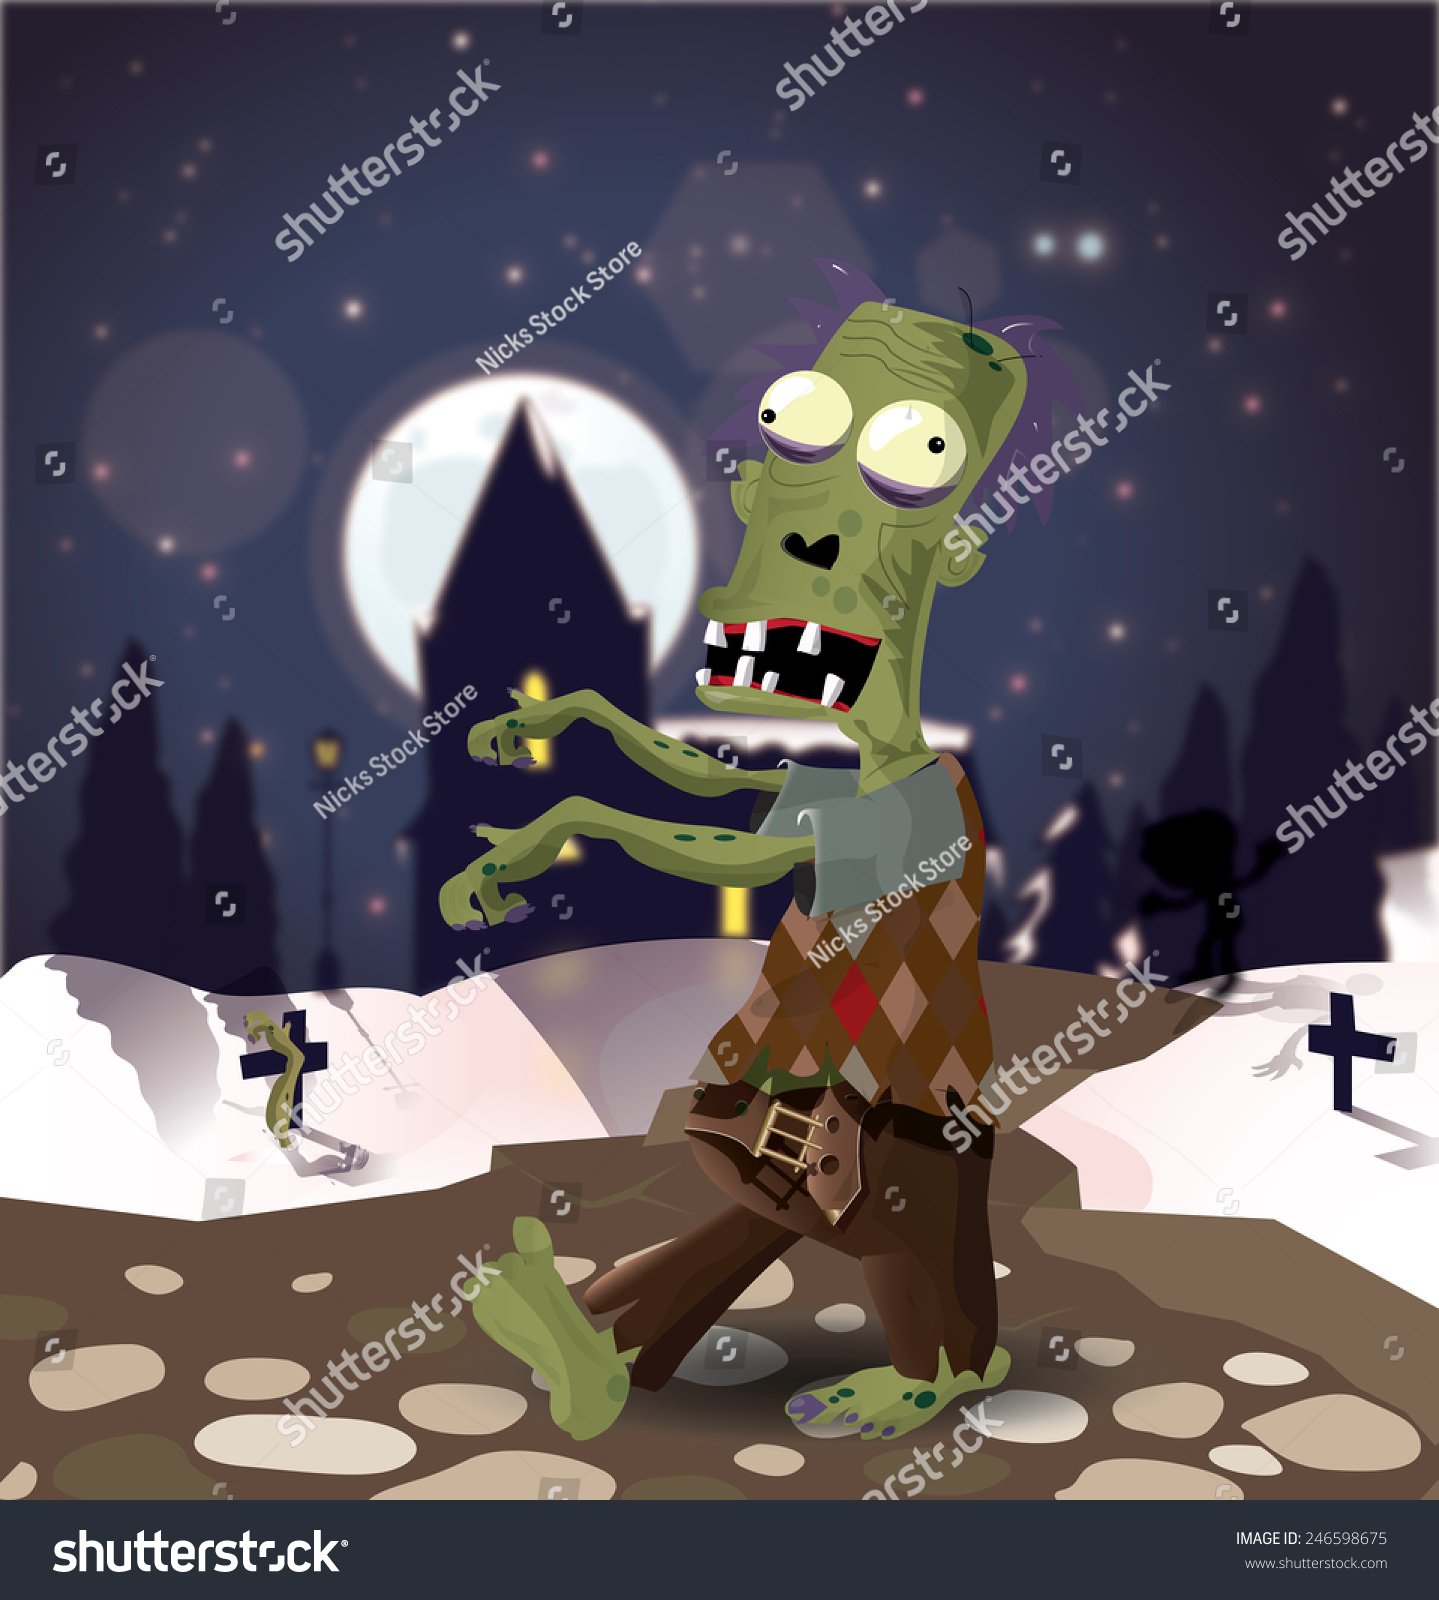 Naked Zombie Images Stock Photos Vectors Shutterstock